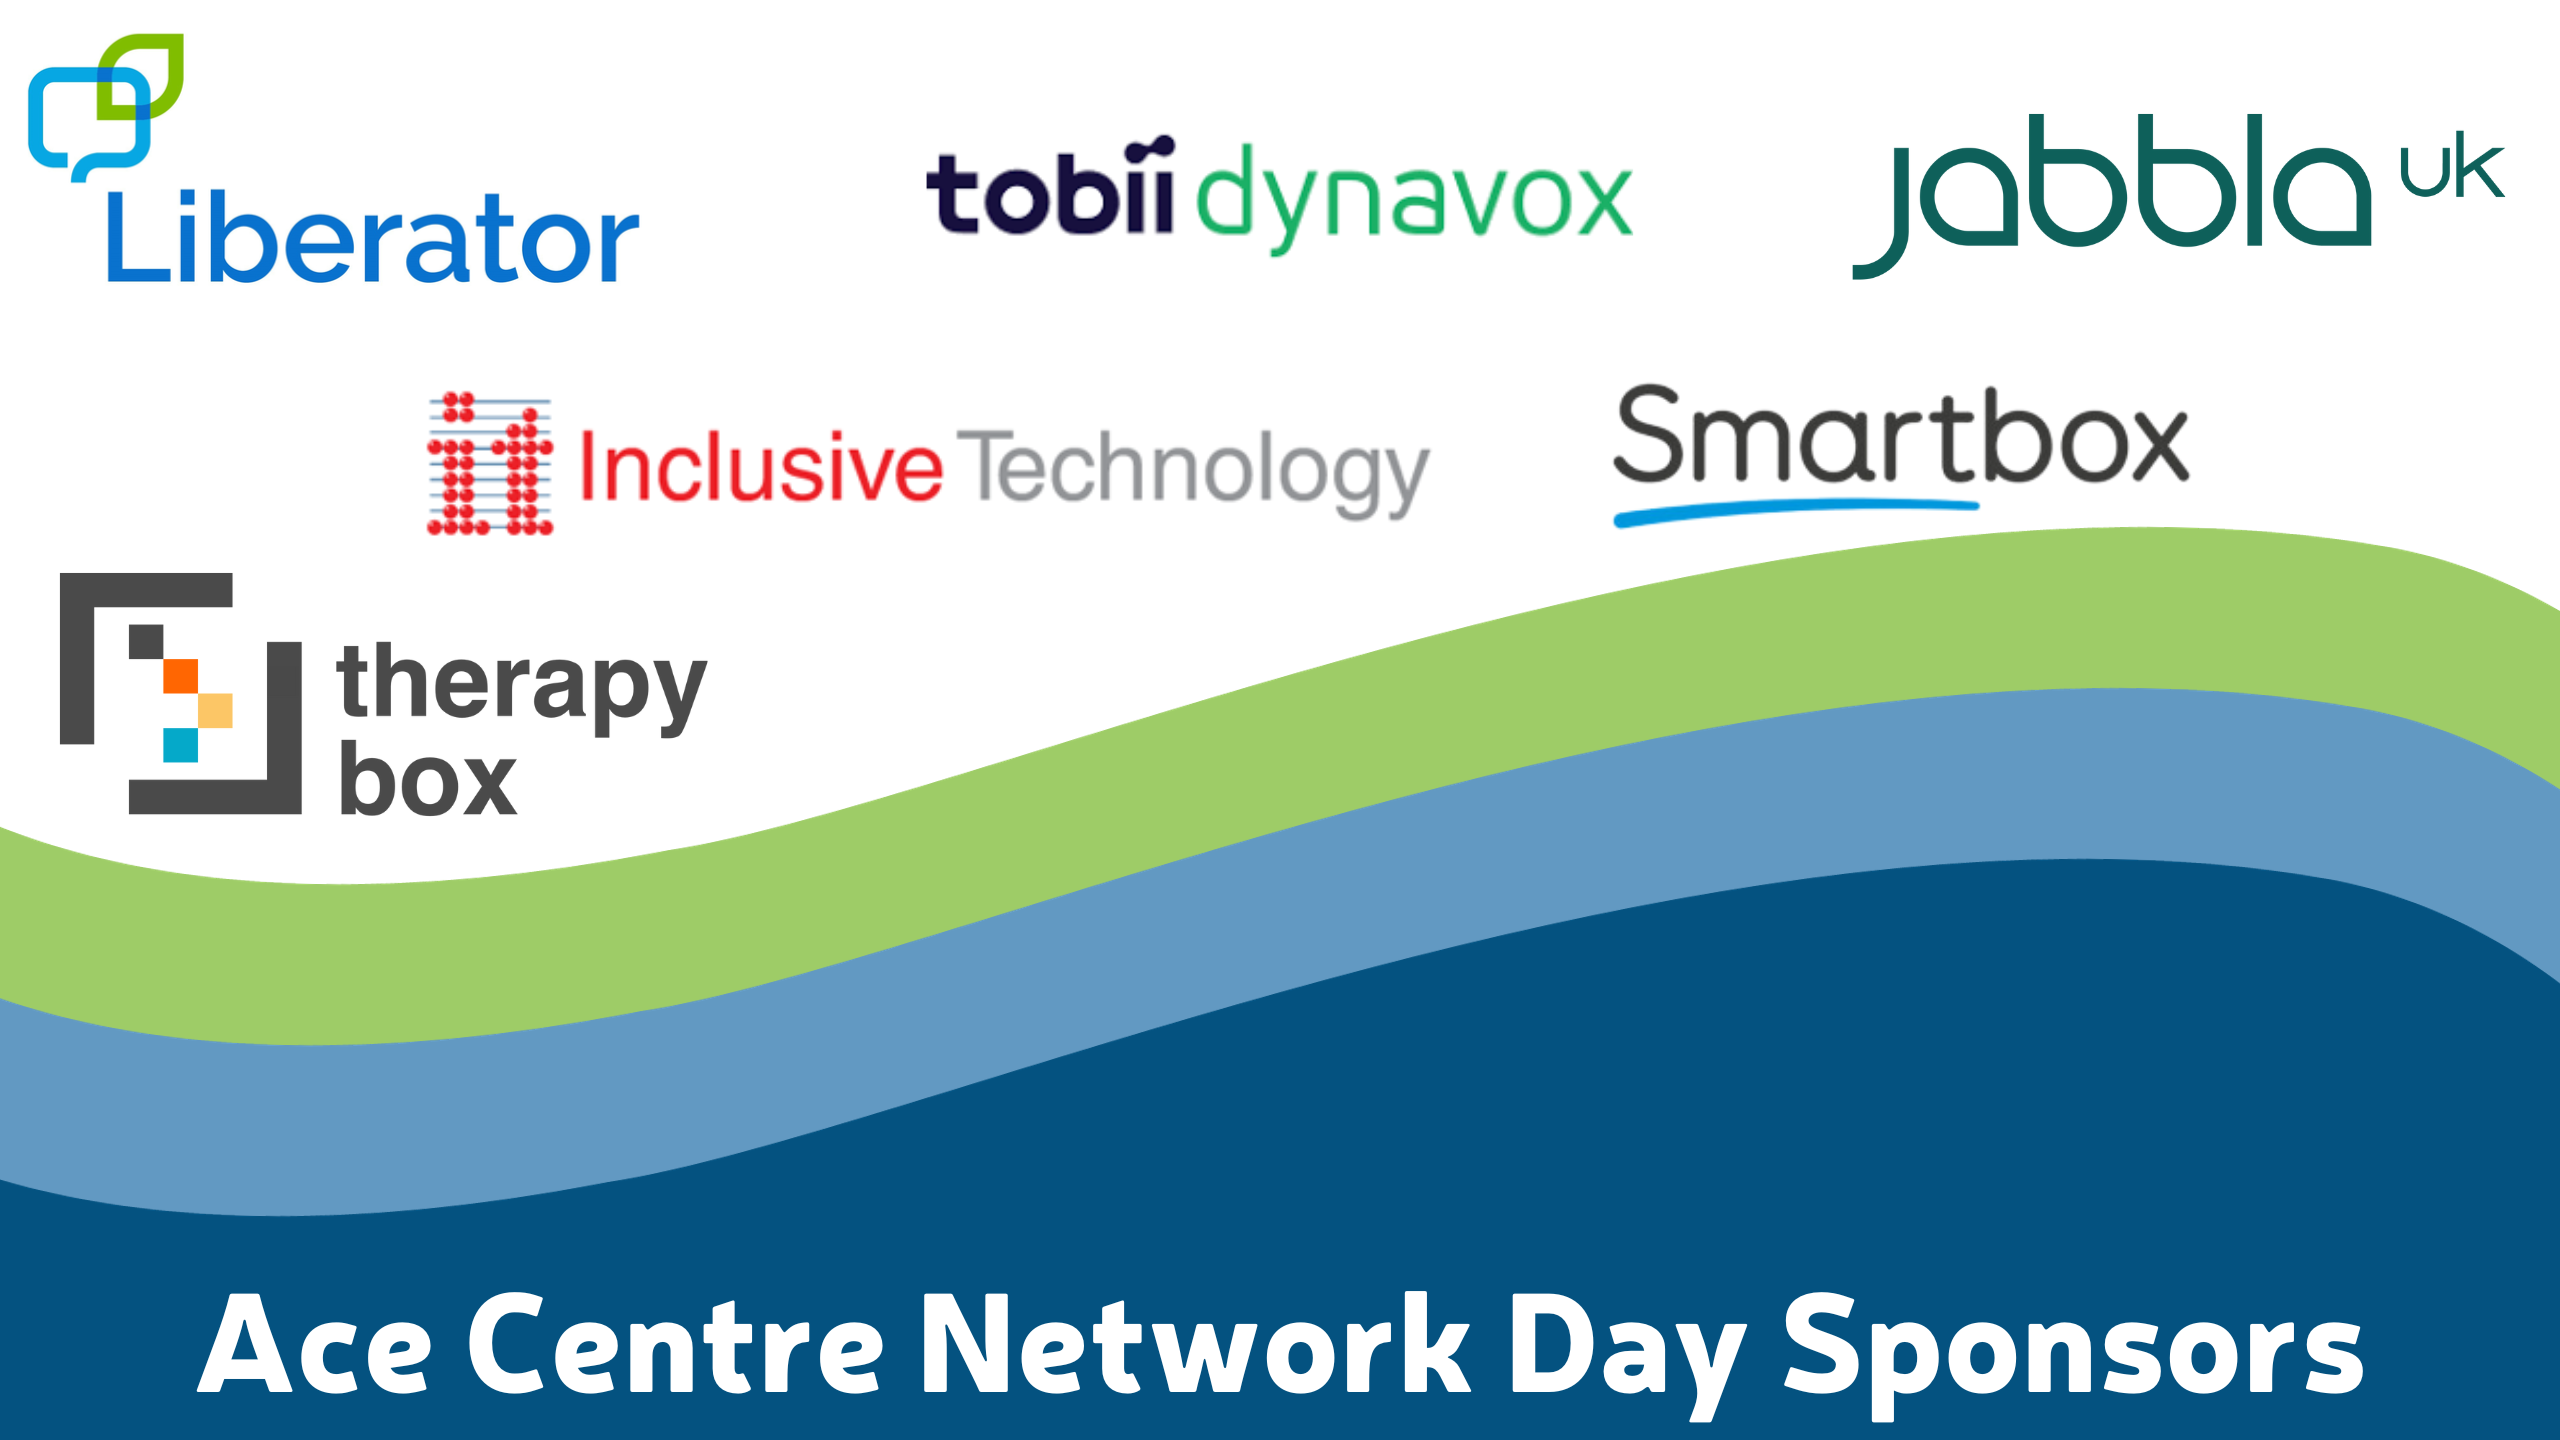 Three waves at the bottom in Ace Centre colours of lime green, light and dark blue on a white background. On the blue wave it says Ace Centre Network Day Sponsors. In the white background there are logos for Liberator, Tobii Dynavox, Jabbla UK, Inclusive Technology, Smartbox and Therapy Box. 